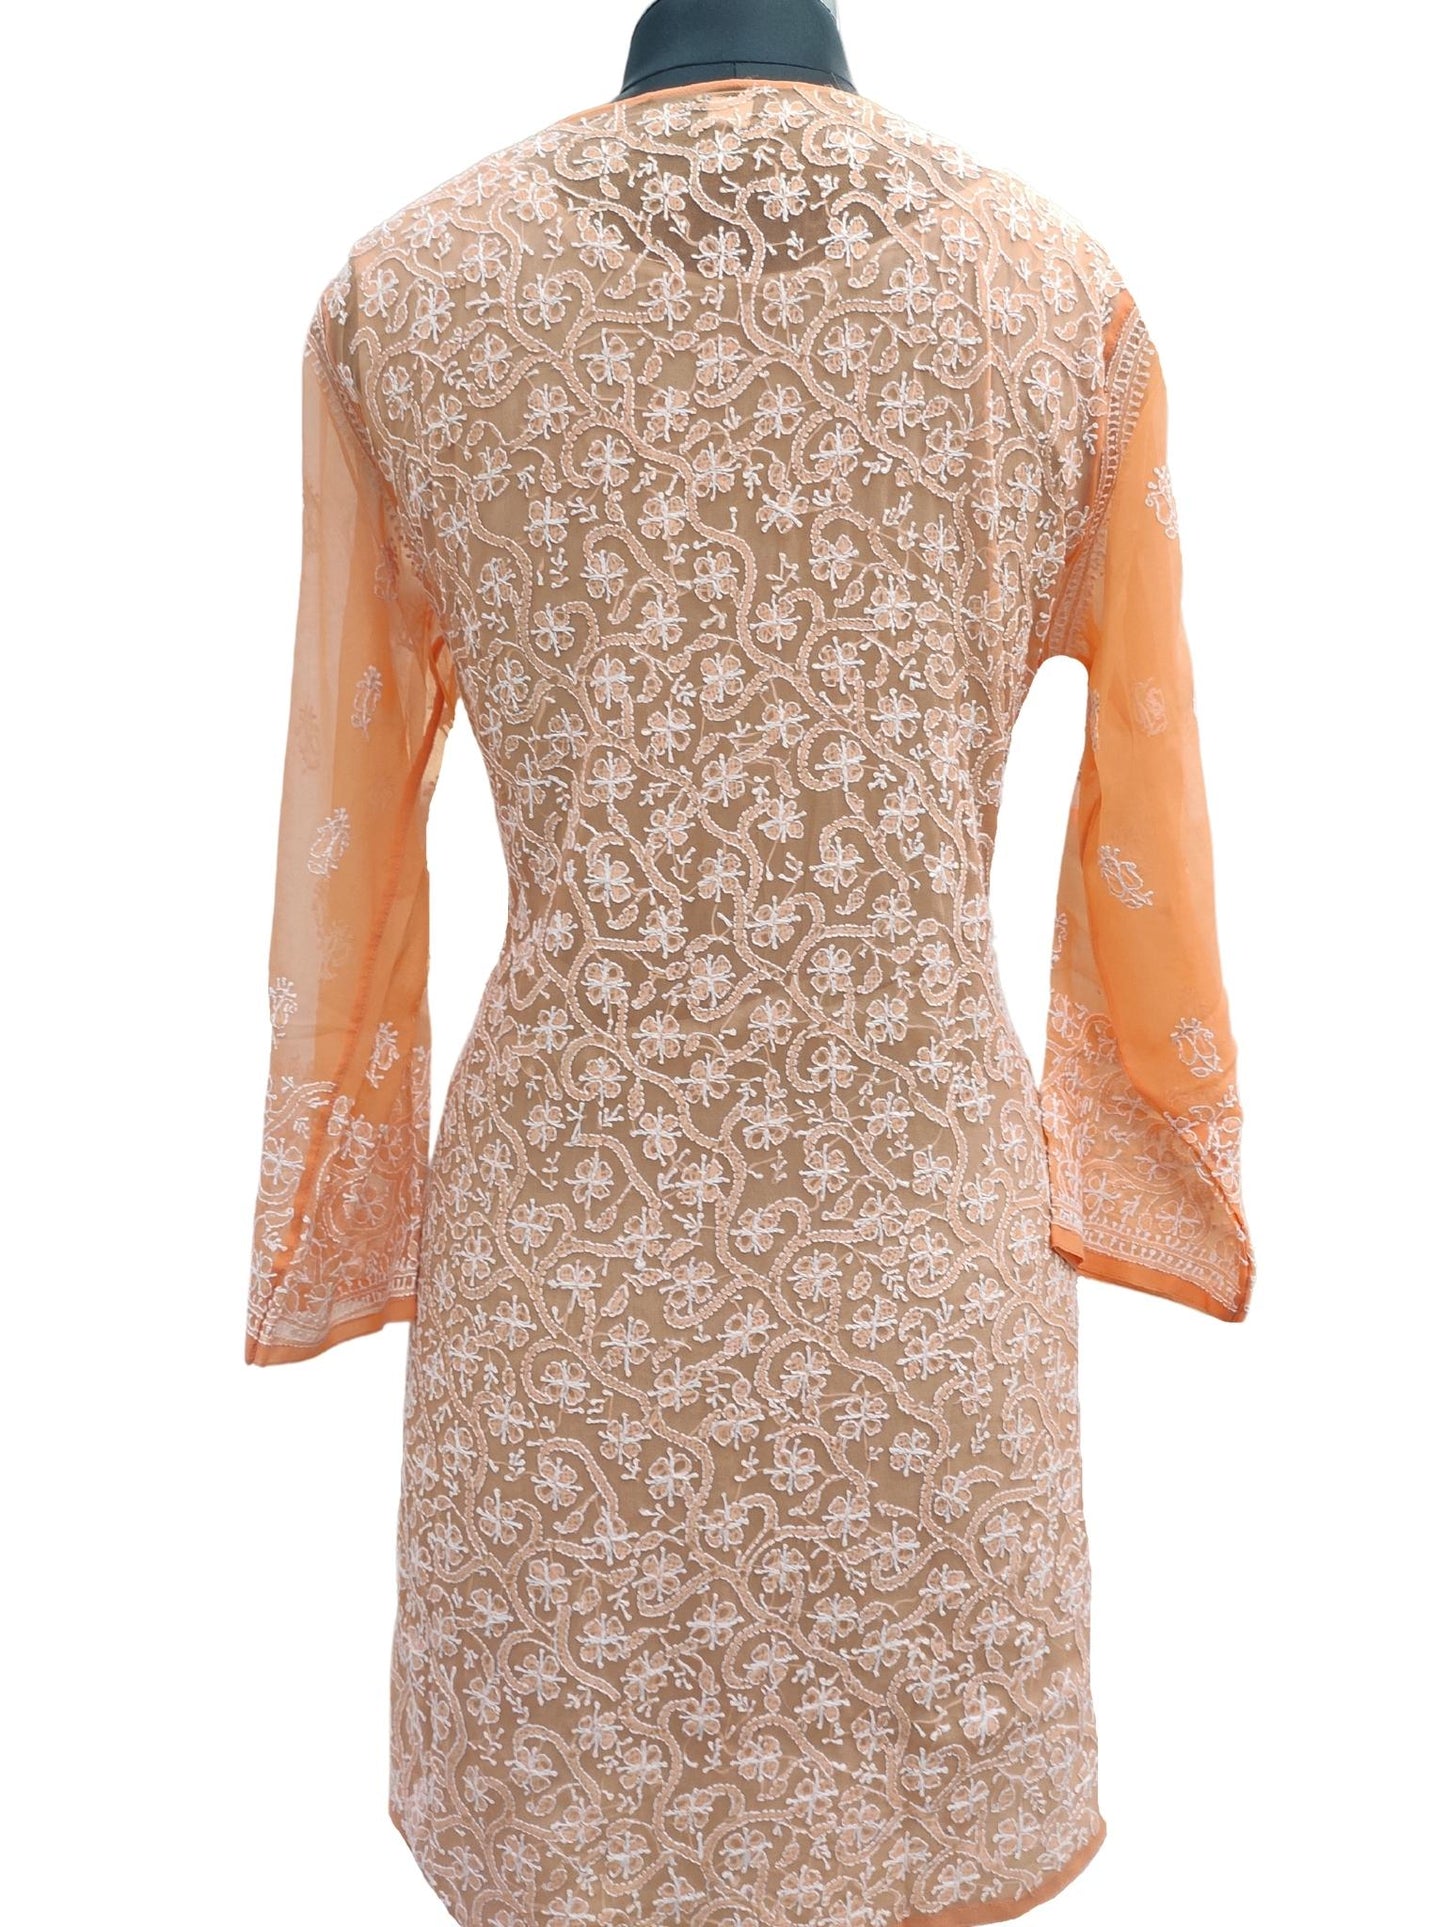 Shyamal Chikan Hand Embroidered Orange Georgette All-Over Lucknowi Chikankari Short Top - S16992